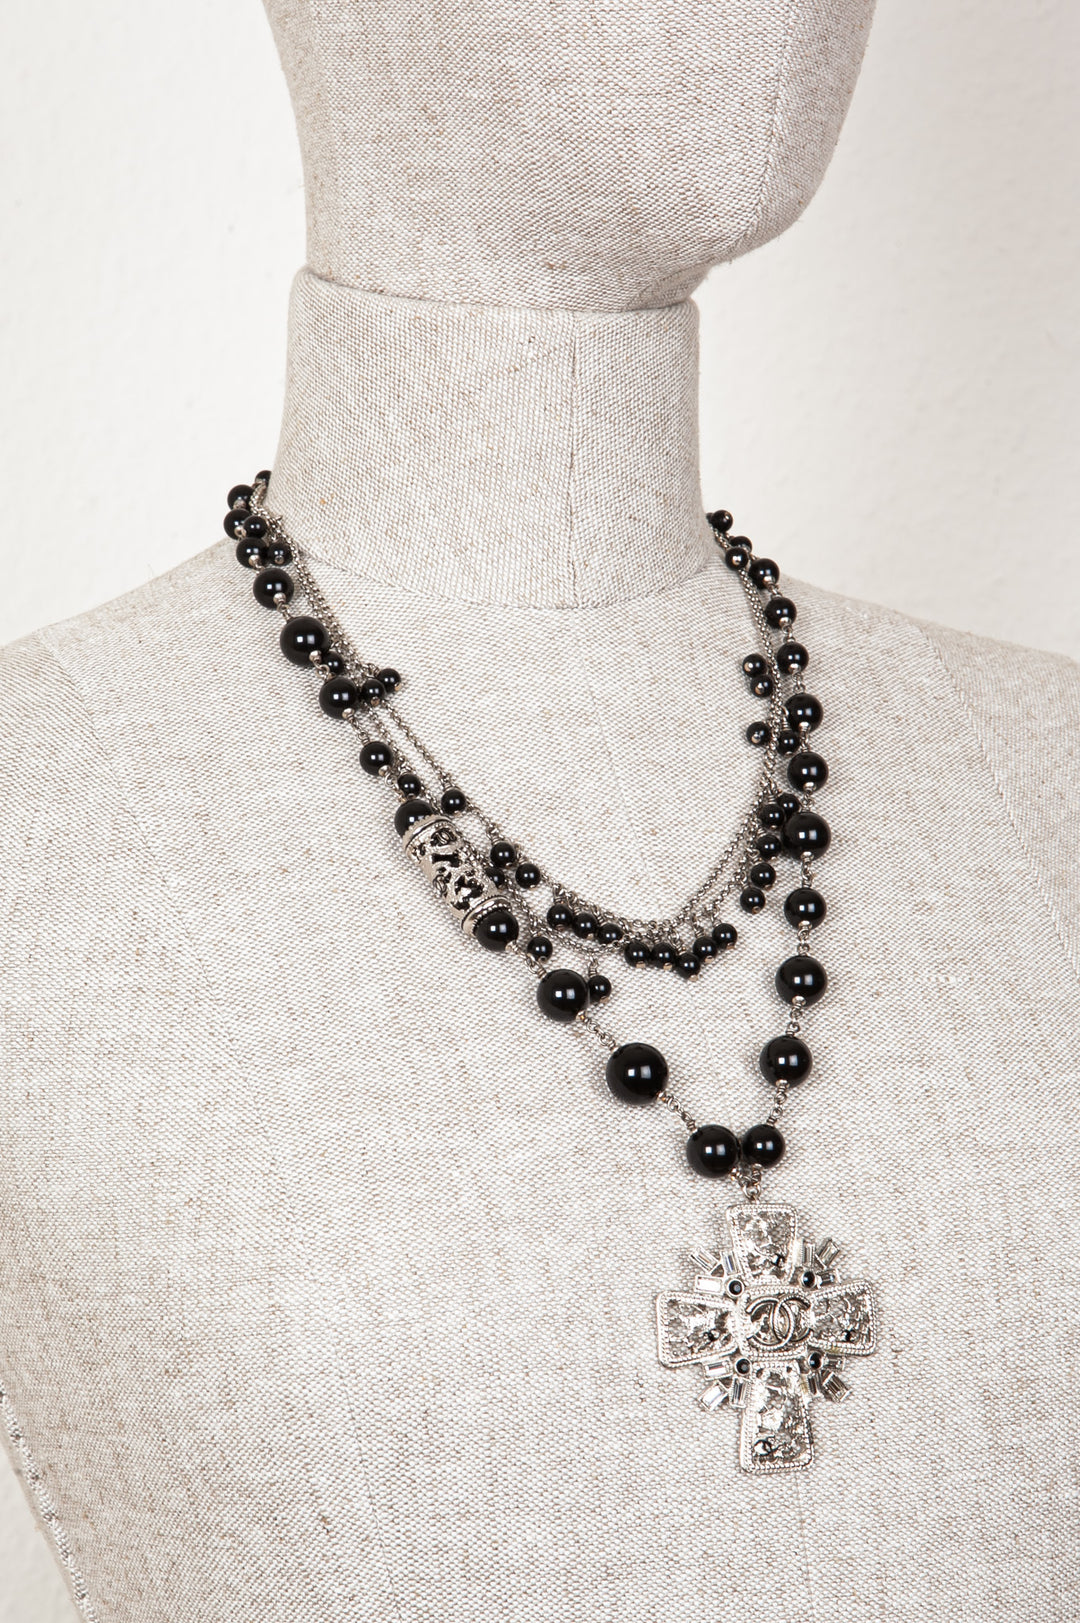 CHANEL Cross Necklace FW 2010